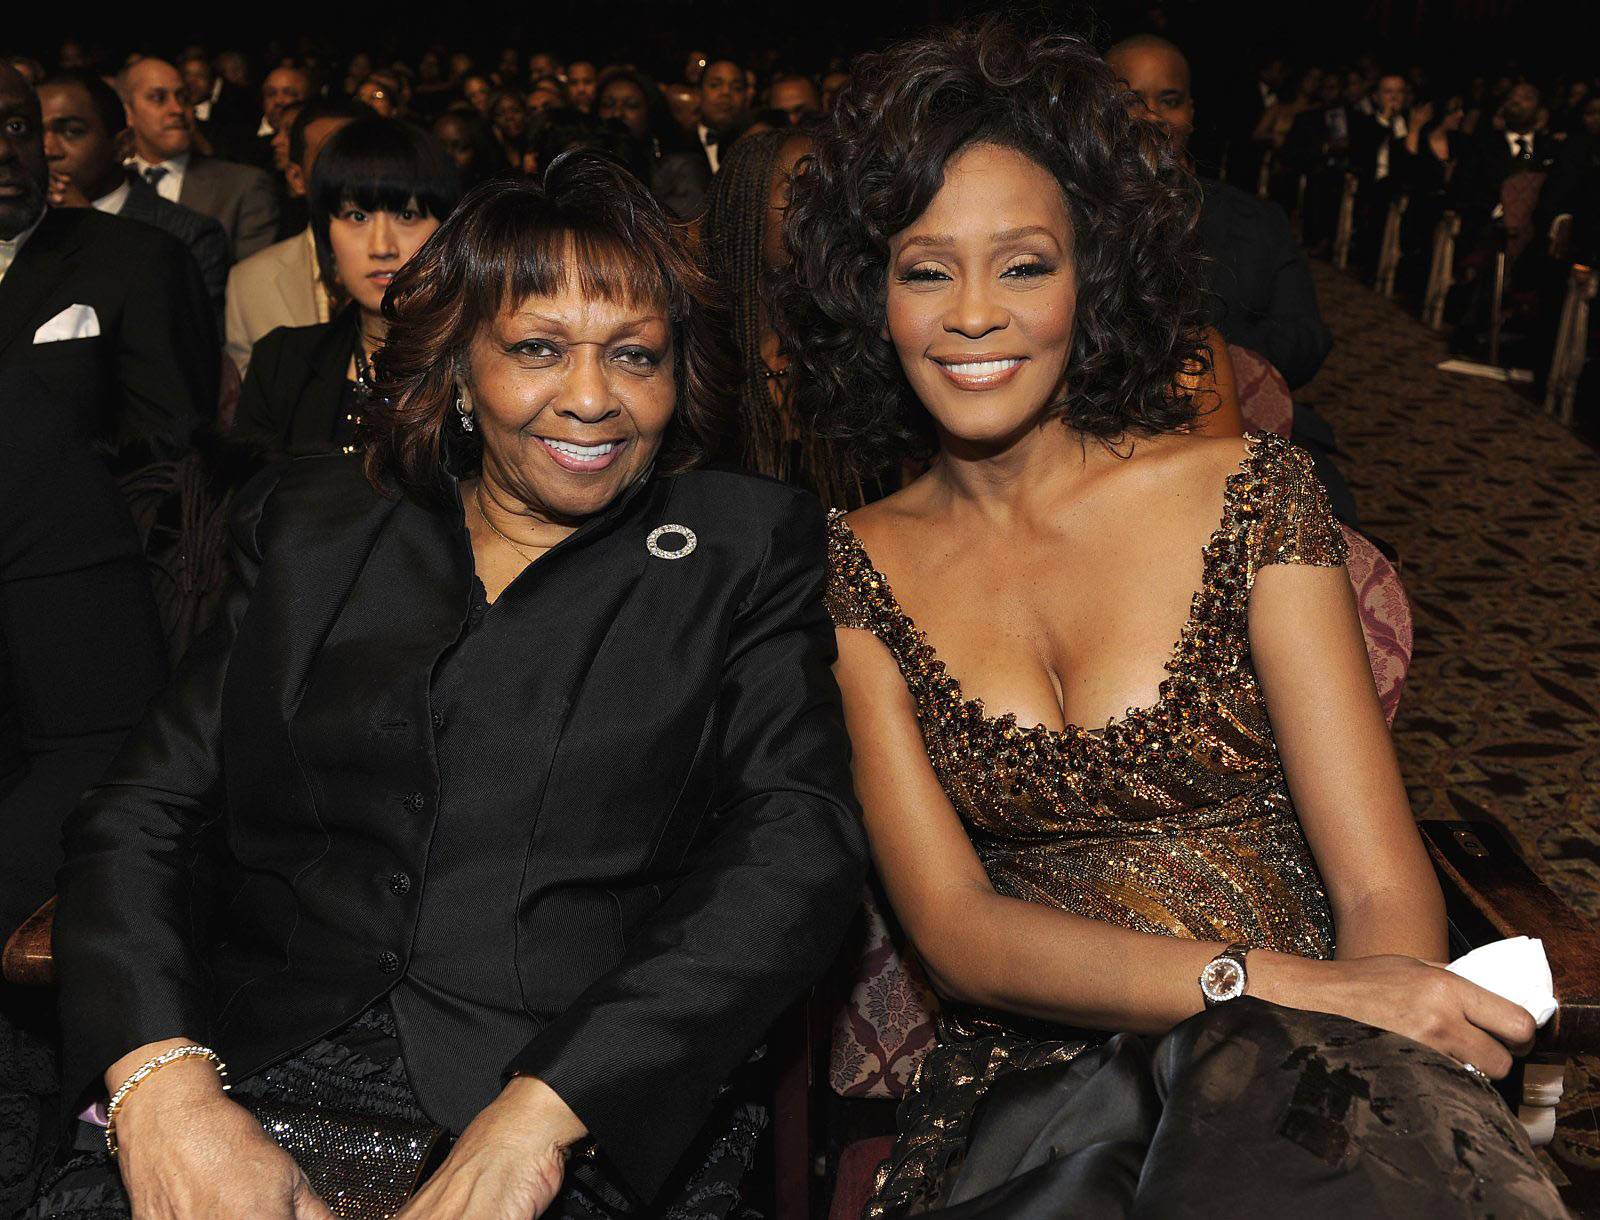 Two Icons at the BET Awards: 2010 - When a cleaned-up Whitney Houston accepted the Entertainment Award at the 2010 BET Honors. Her tear-jerking speech was directed at her mother Cissy, who stood by her during her most tumultuous decade. There wasn't a dry eye in the house by the time Whitney got off the stage.&nbsp;(Photo: Frank Micelotta/Getty Images)